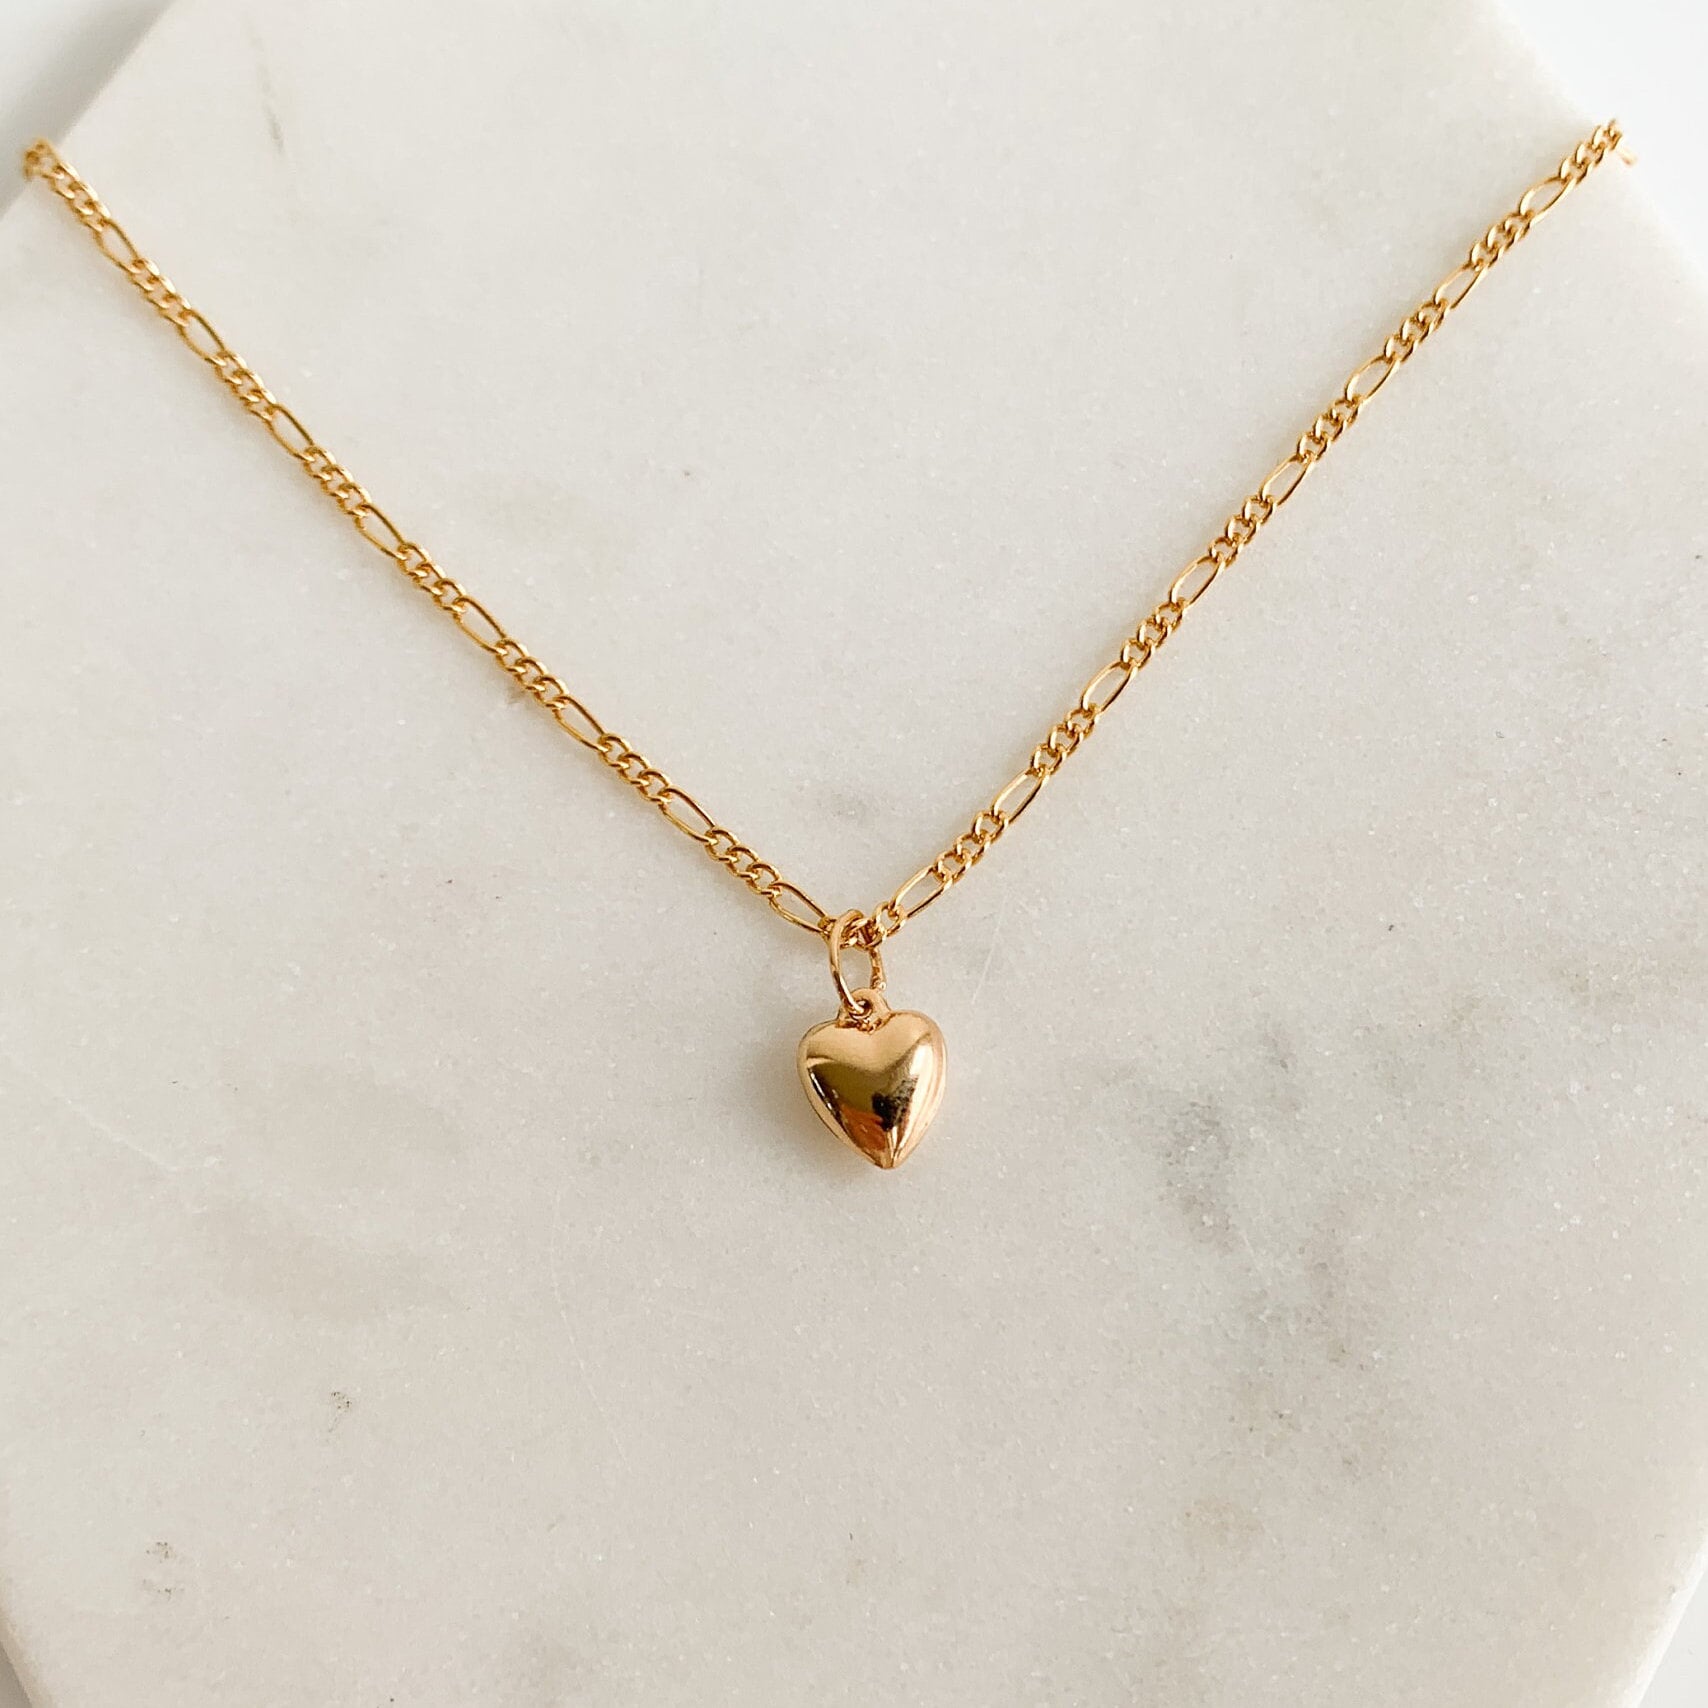 Tiny Gold Heart Necklace, Puffy Heart Pendant Necklace, 14k Gold